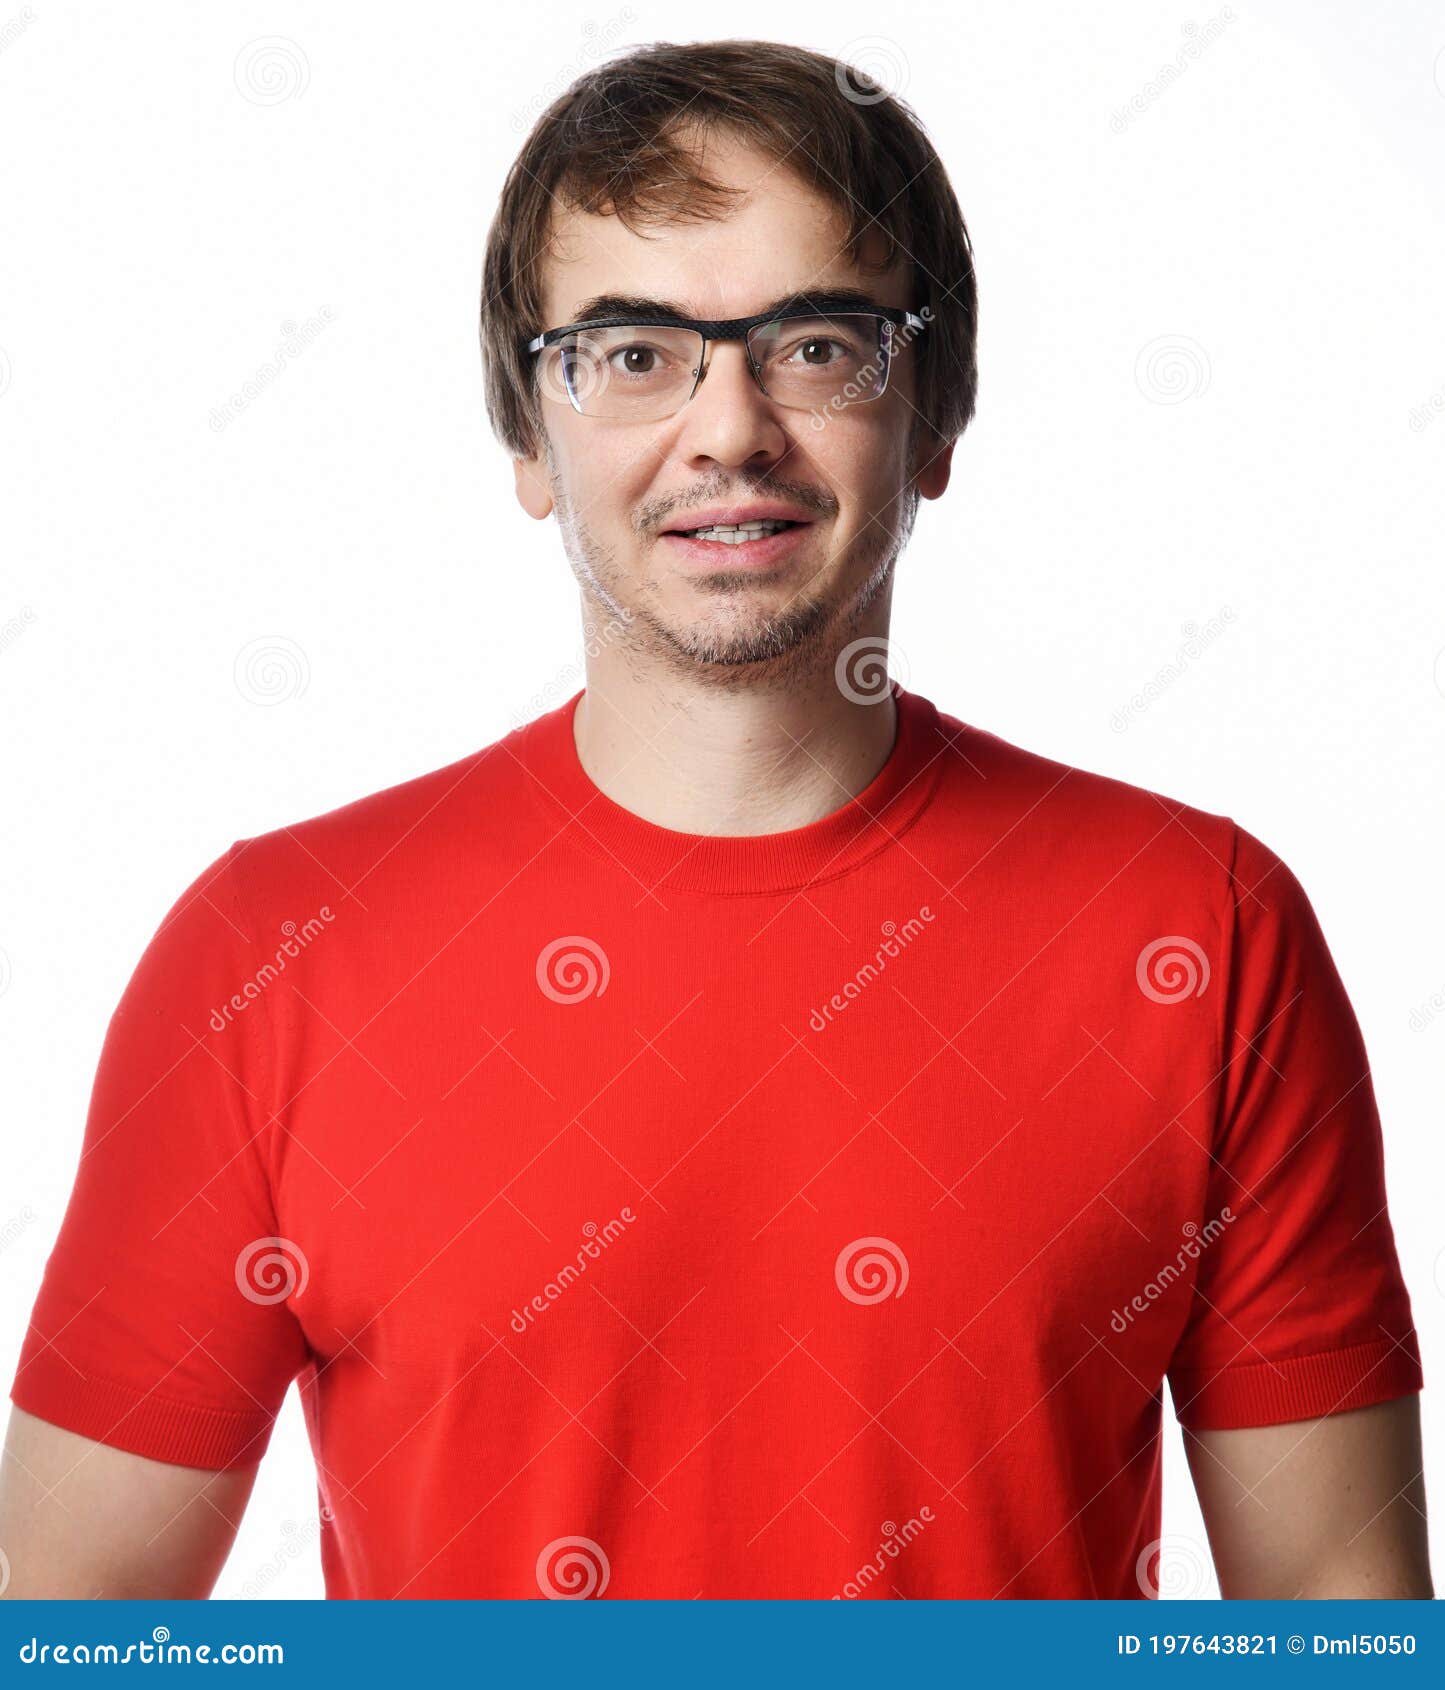 portrait of smiling positive excited unshaved man in glasses and red t-shirt retelling a story over white background